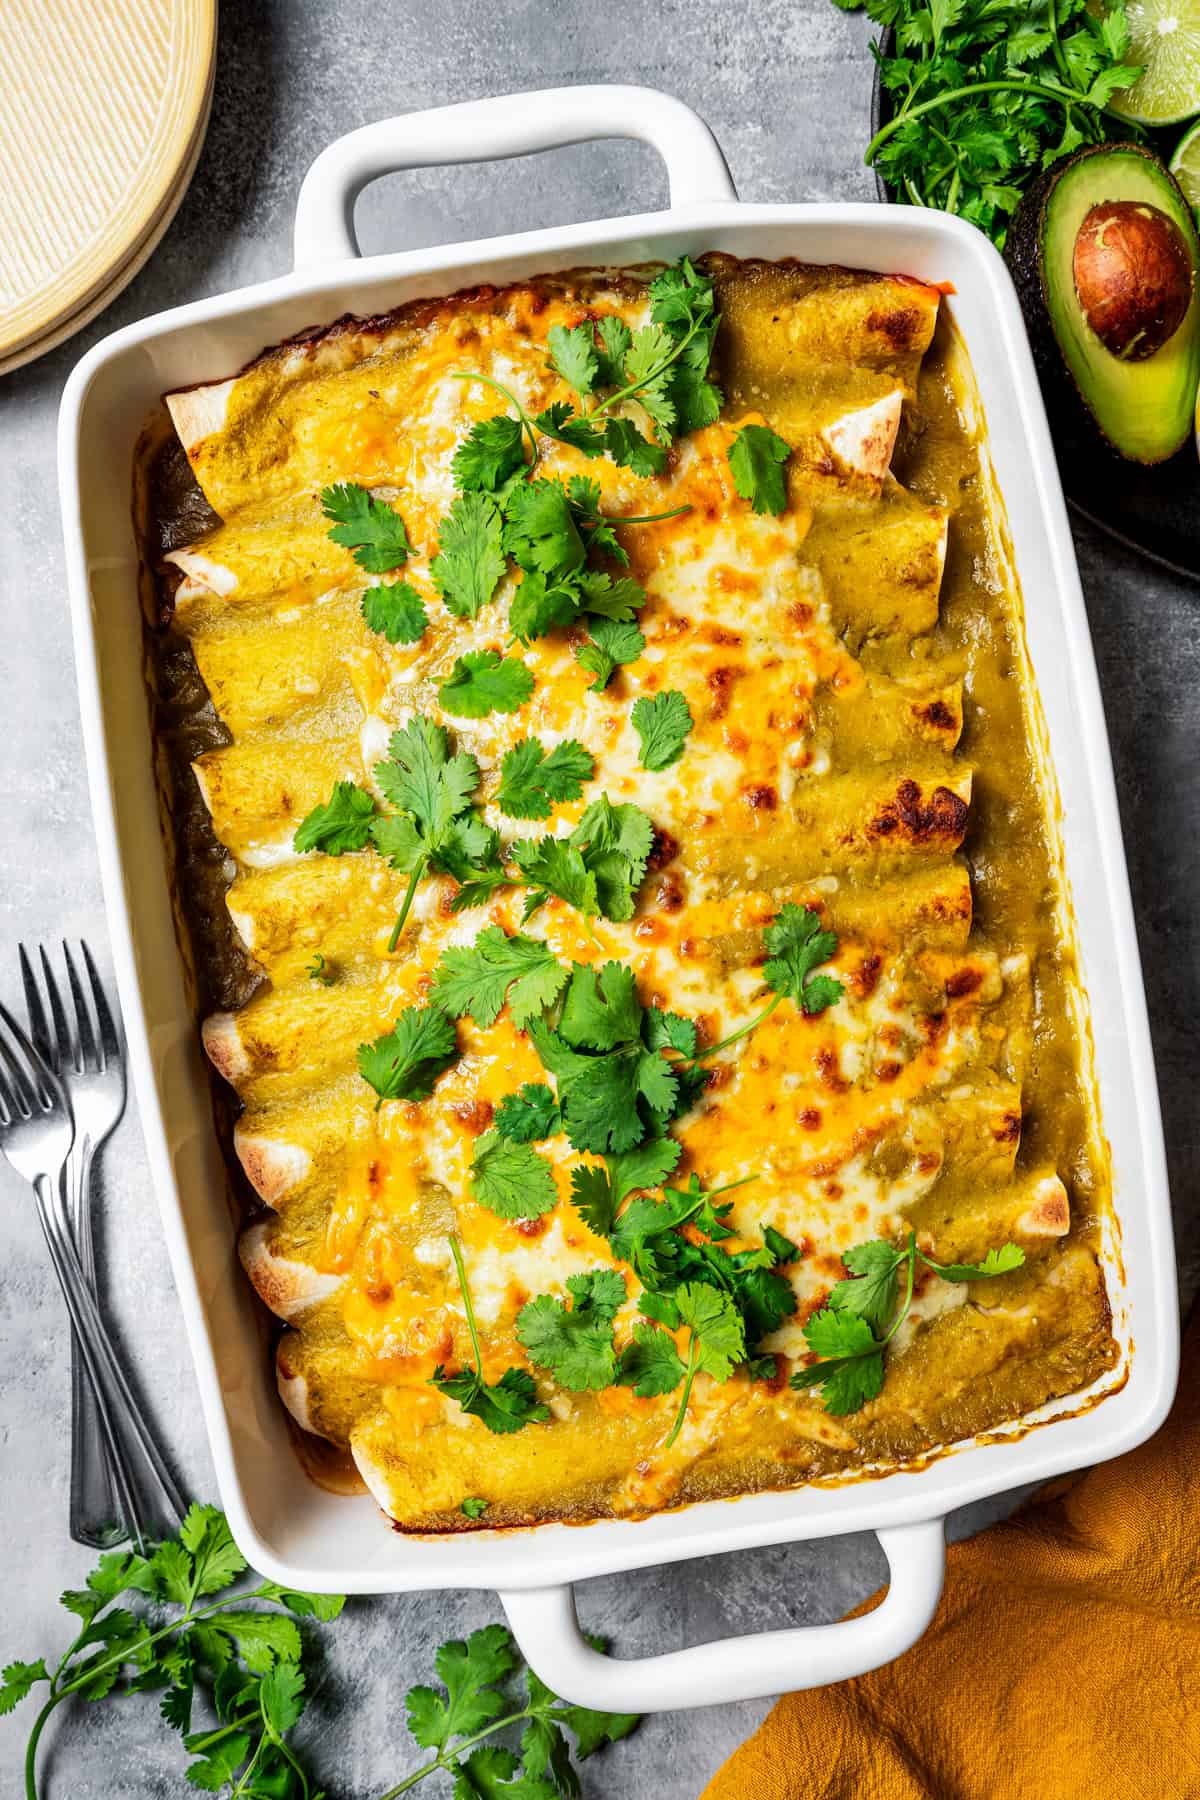 Green chili chicken enchiladas in a baking dish garnished with fresh cilantro leaves. There's an avocado, two forks, and an orange kitchen towel set around the baking dish.